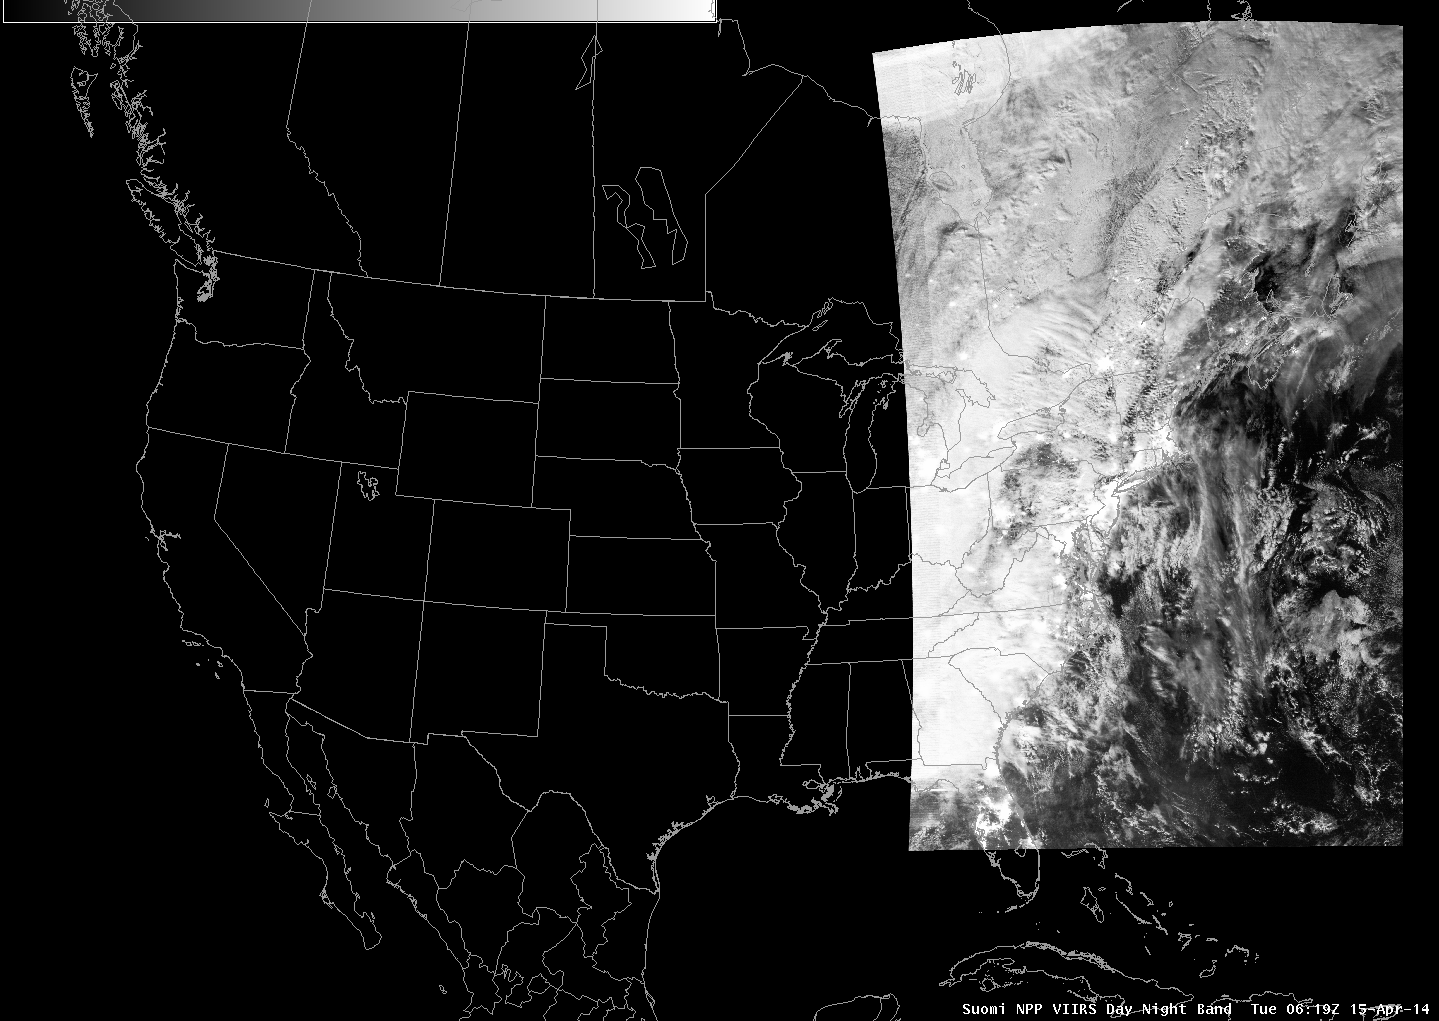 Suomi NPP VIIRS Day Night Band images, times as indicated